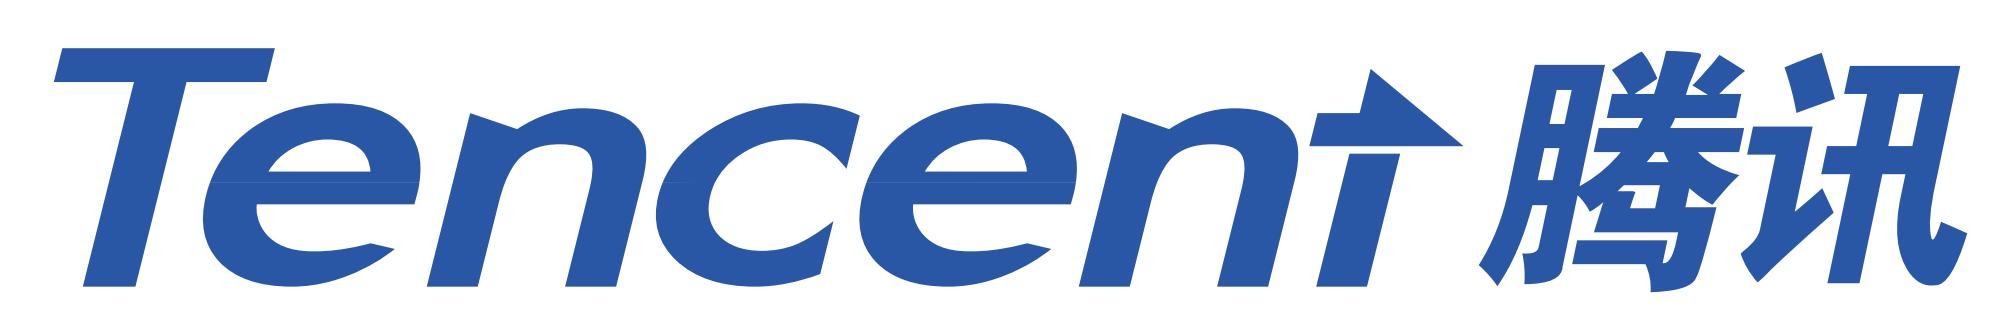 Tencent-Holdings-logo1